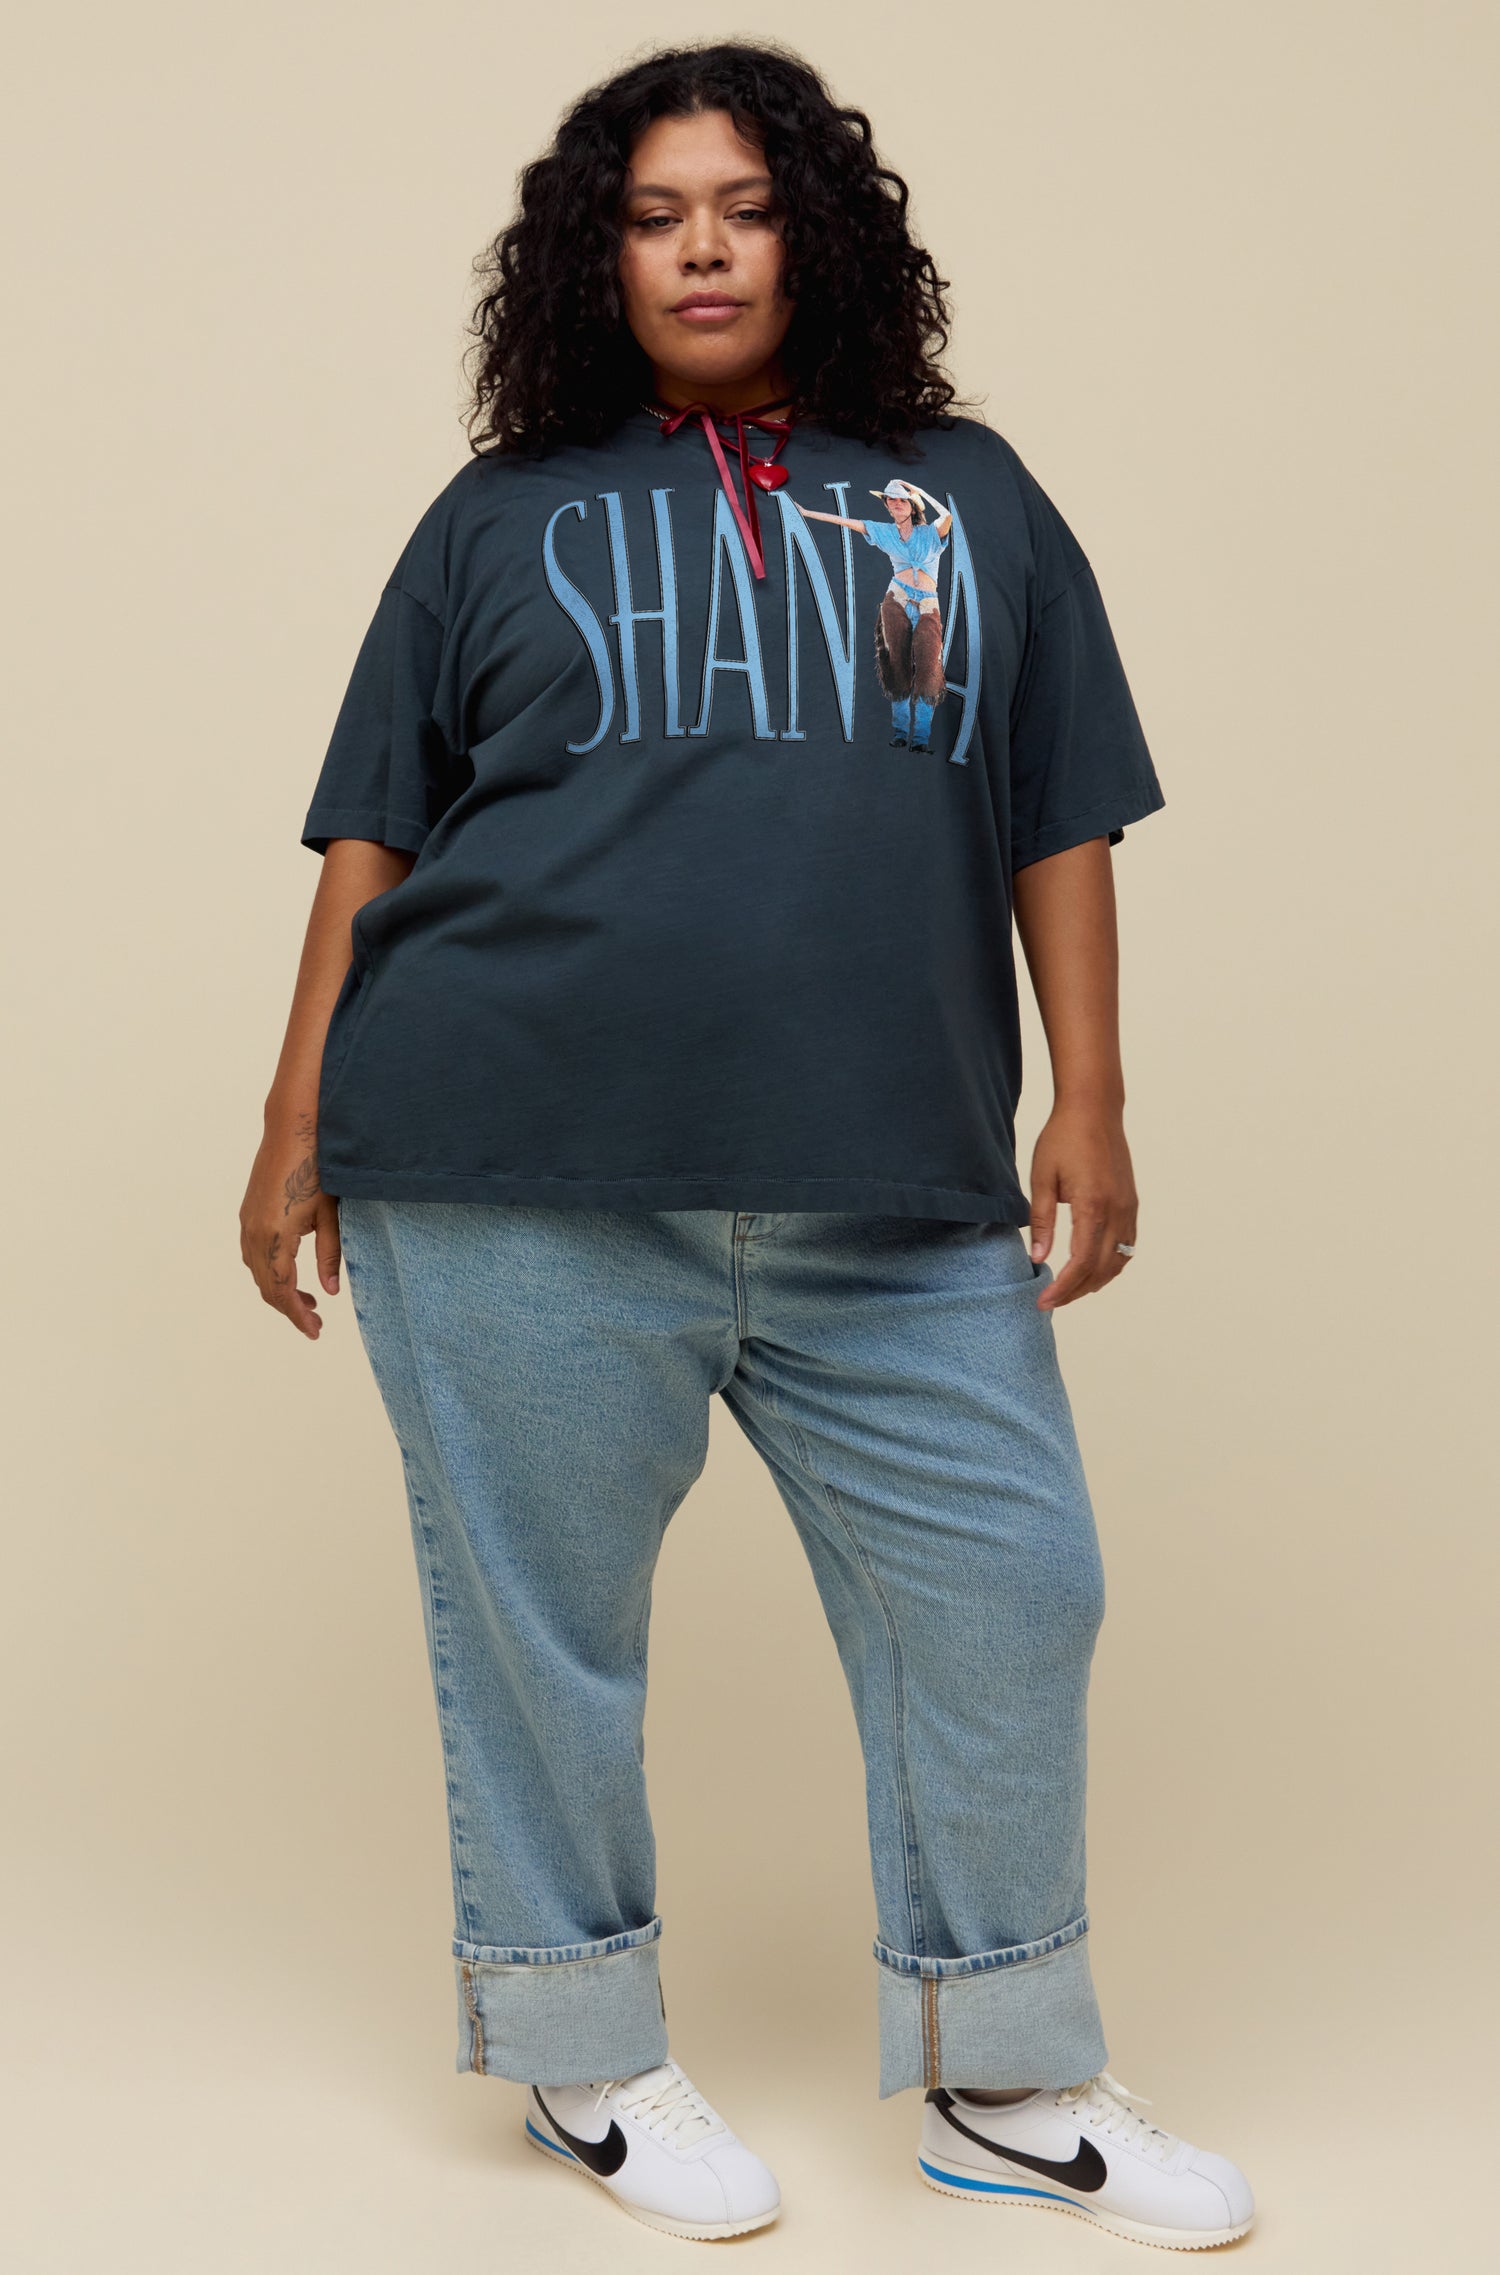 A model featuring a black tee stamped with Shania in large slim font and a portrait of the Queen of Country Pop